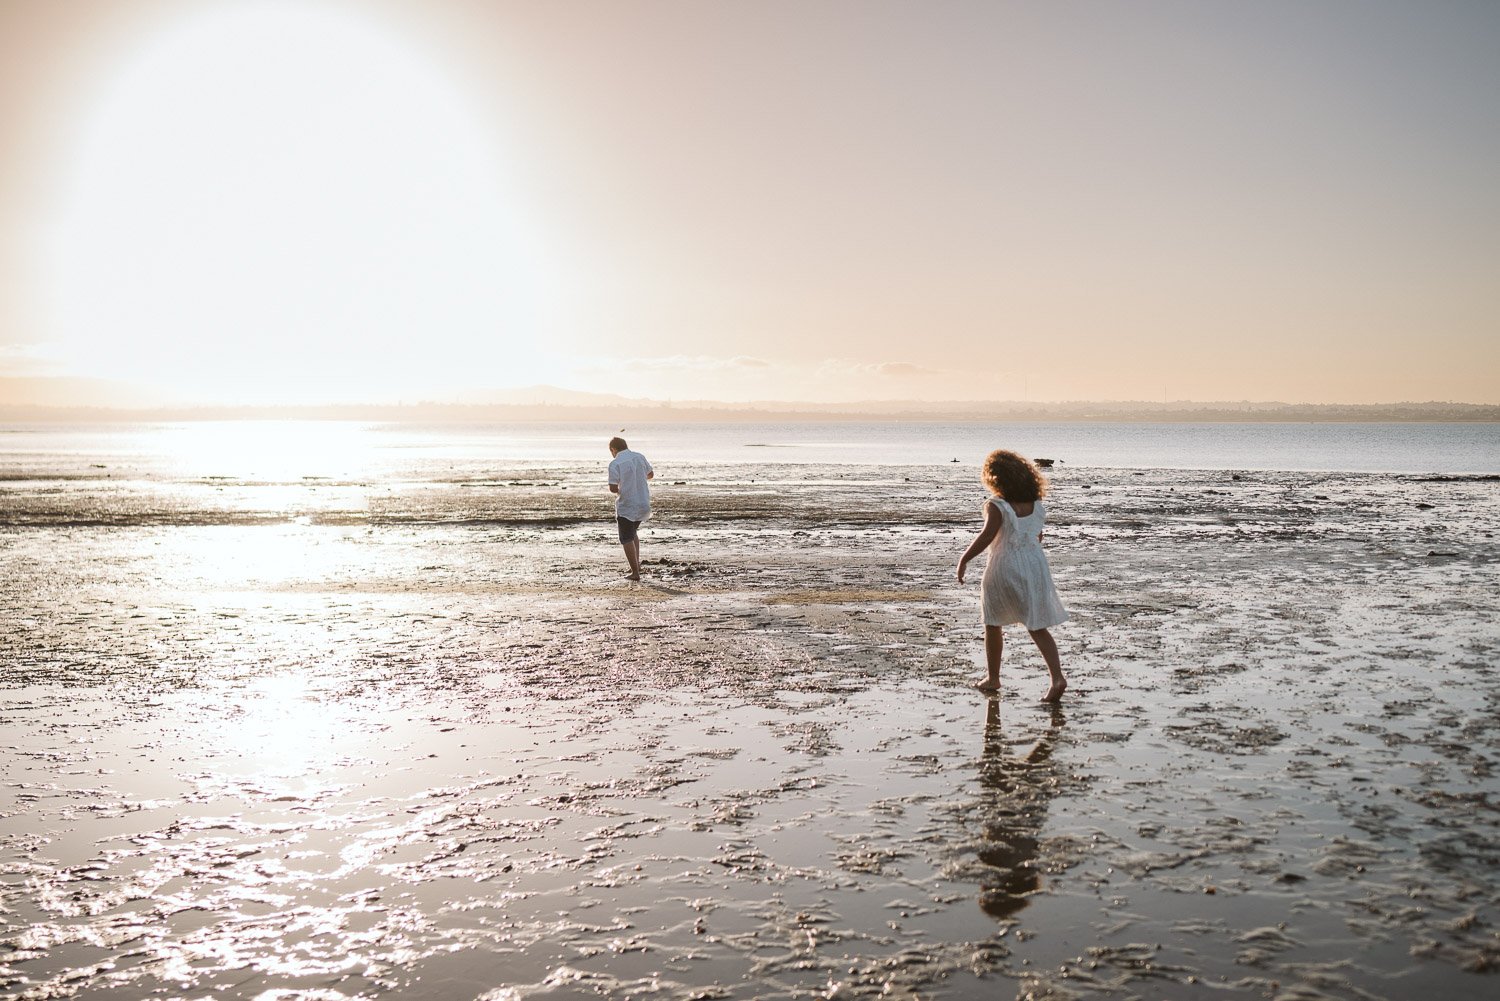 Family Photo Shoot Locations in Auckland - Pt Chev.jpg